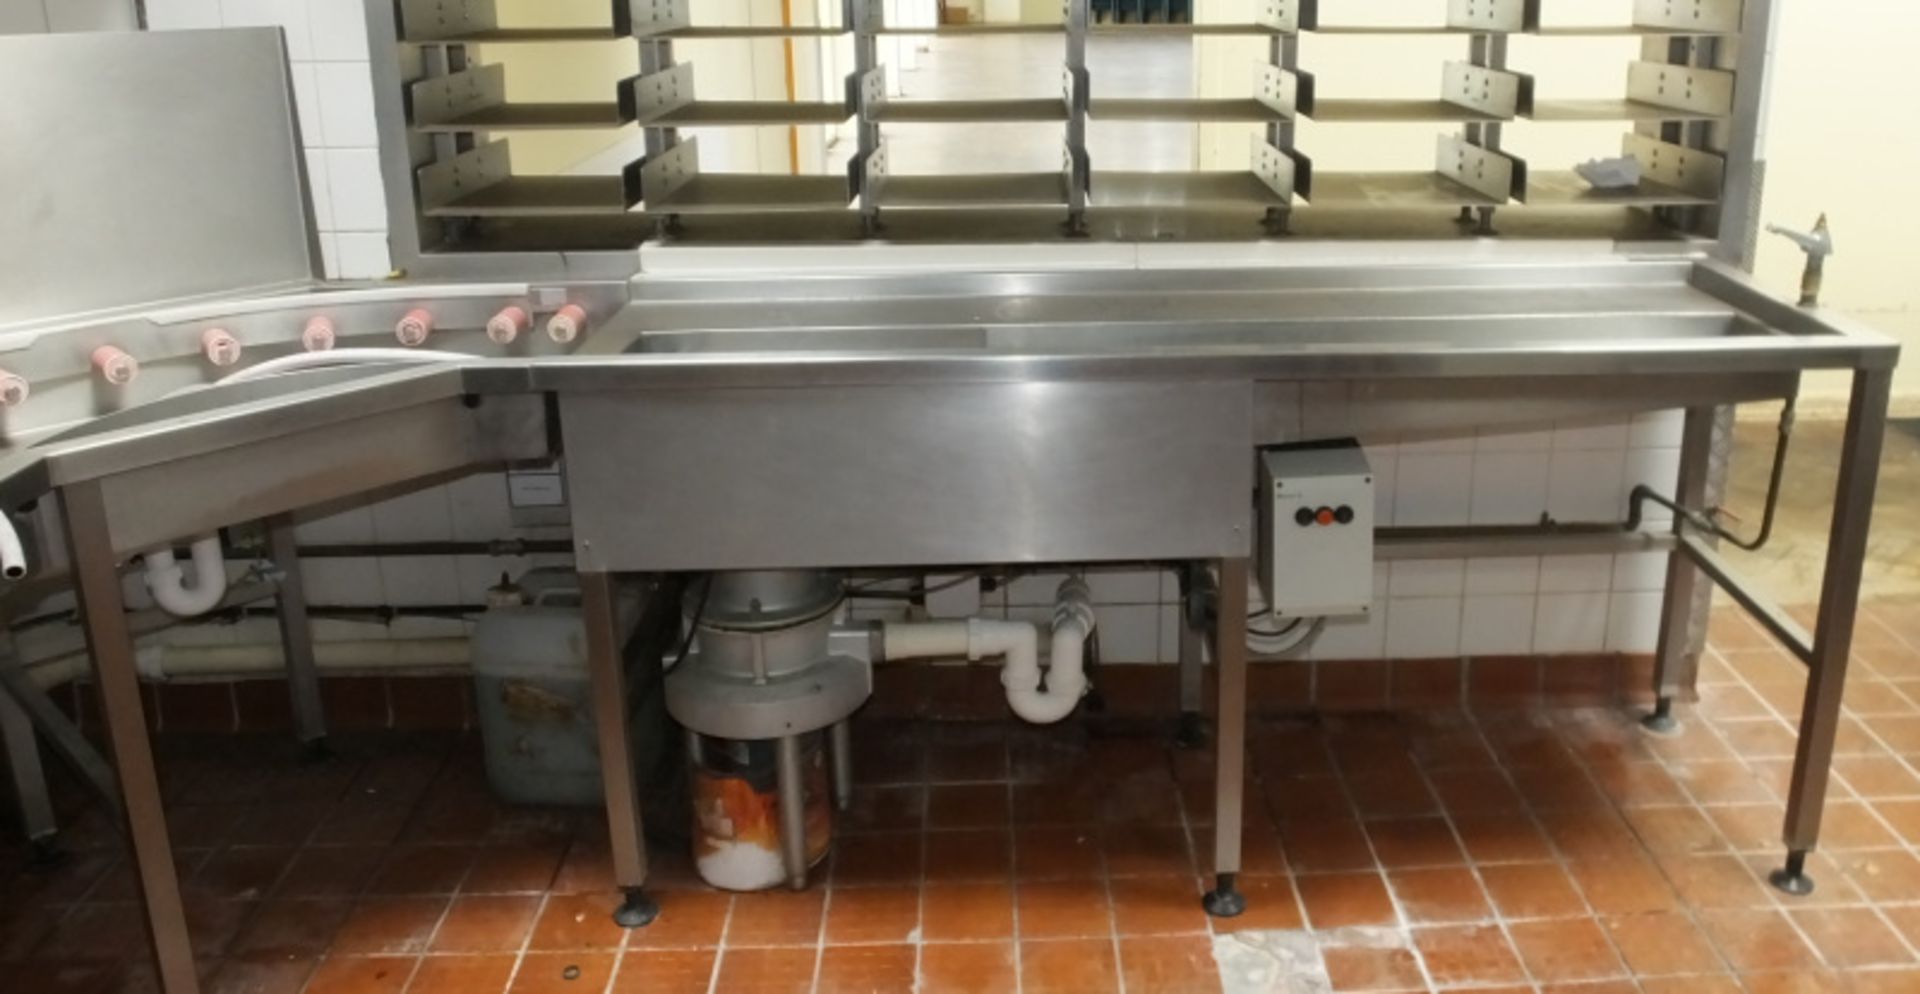 Hobart CHP18 Pass Through Dishwasher Unit with Conveyor System - Details in description - Image 8 of 13